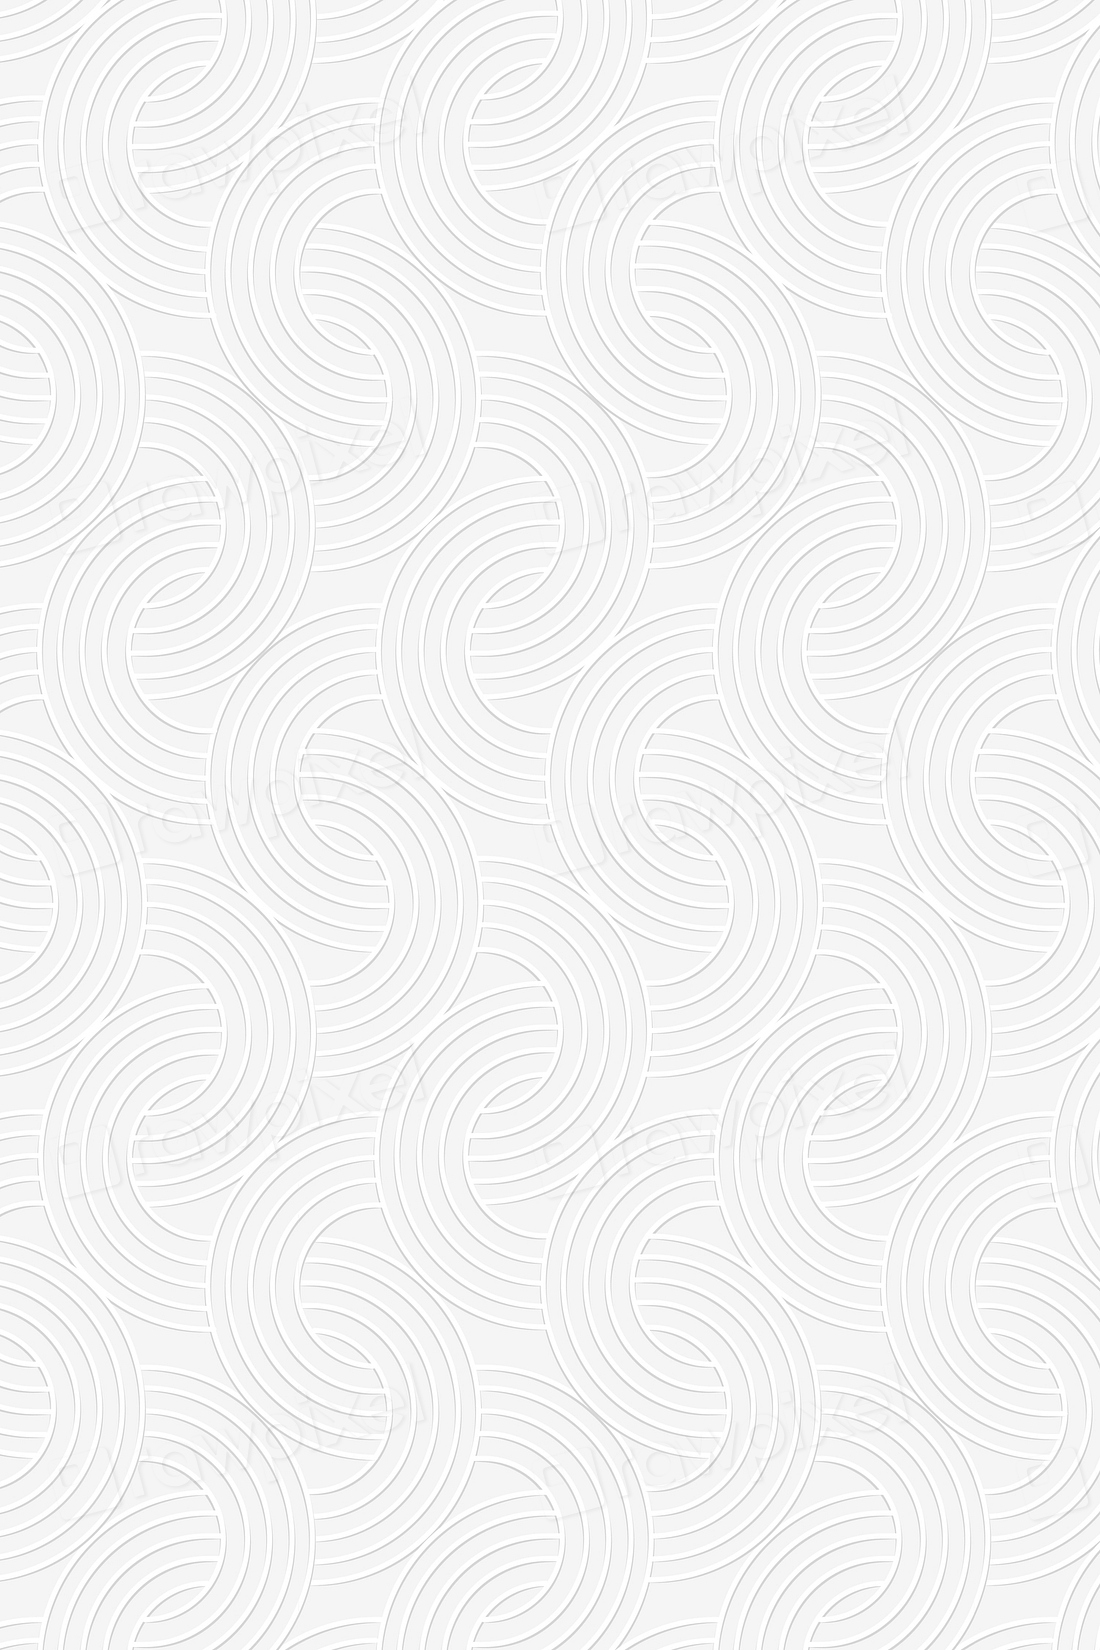 White Interlaced Rounded Arc Patterned Premium Photo Rawpixel